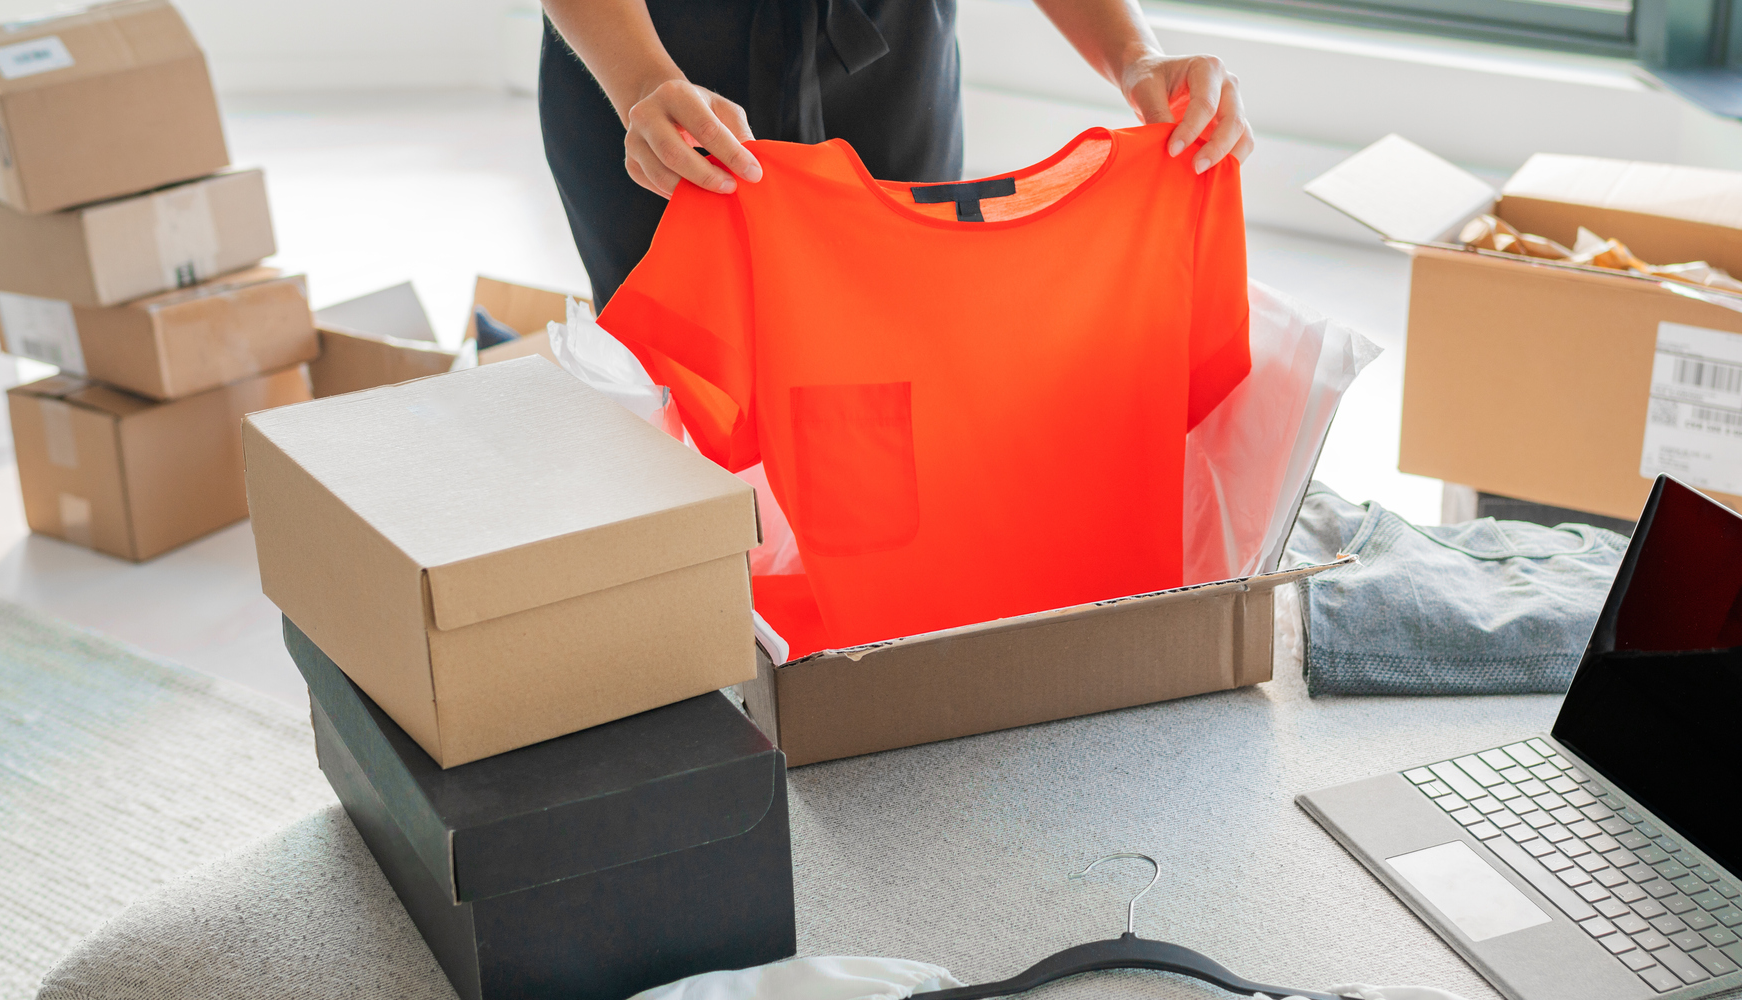 A female seller who is packaging an orange t-shirt in a box to complete the shipment process